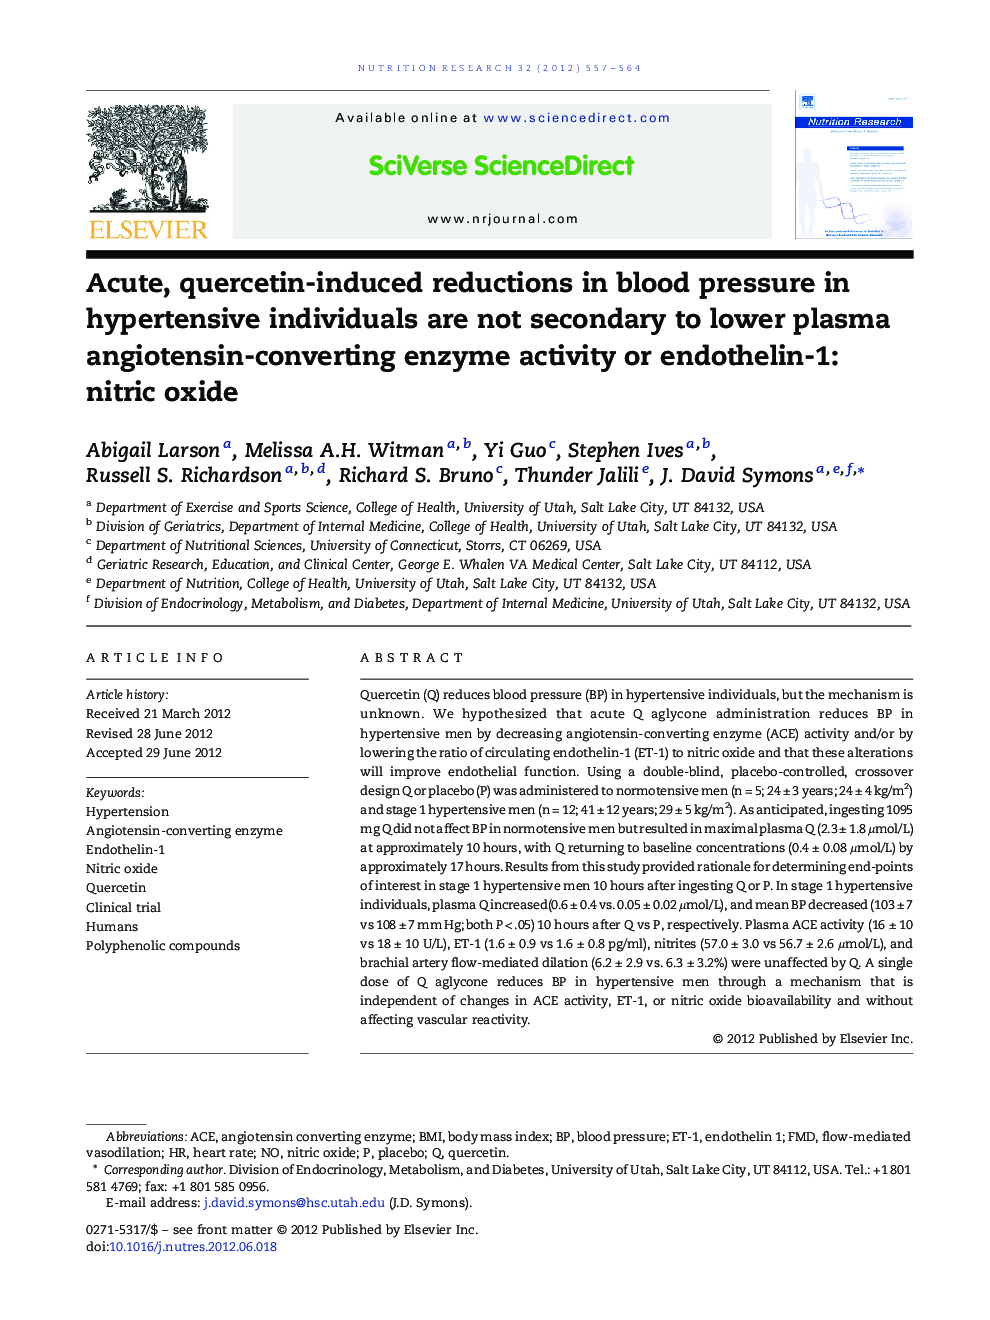 Acute, quercetin-induced reductions in blood pressure in hypertensive individuals are not secondary to lower plasma angiotensin-converting enzyme activity or endothelin-1: nitric oxide